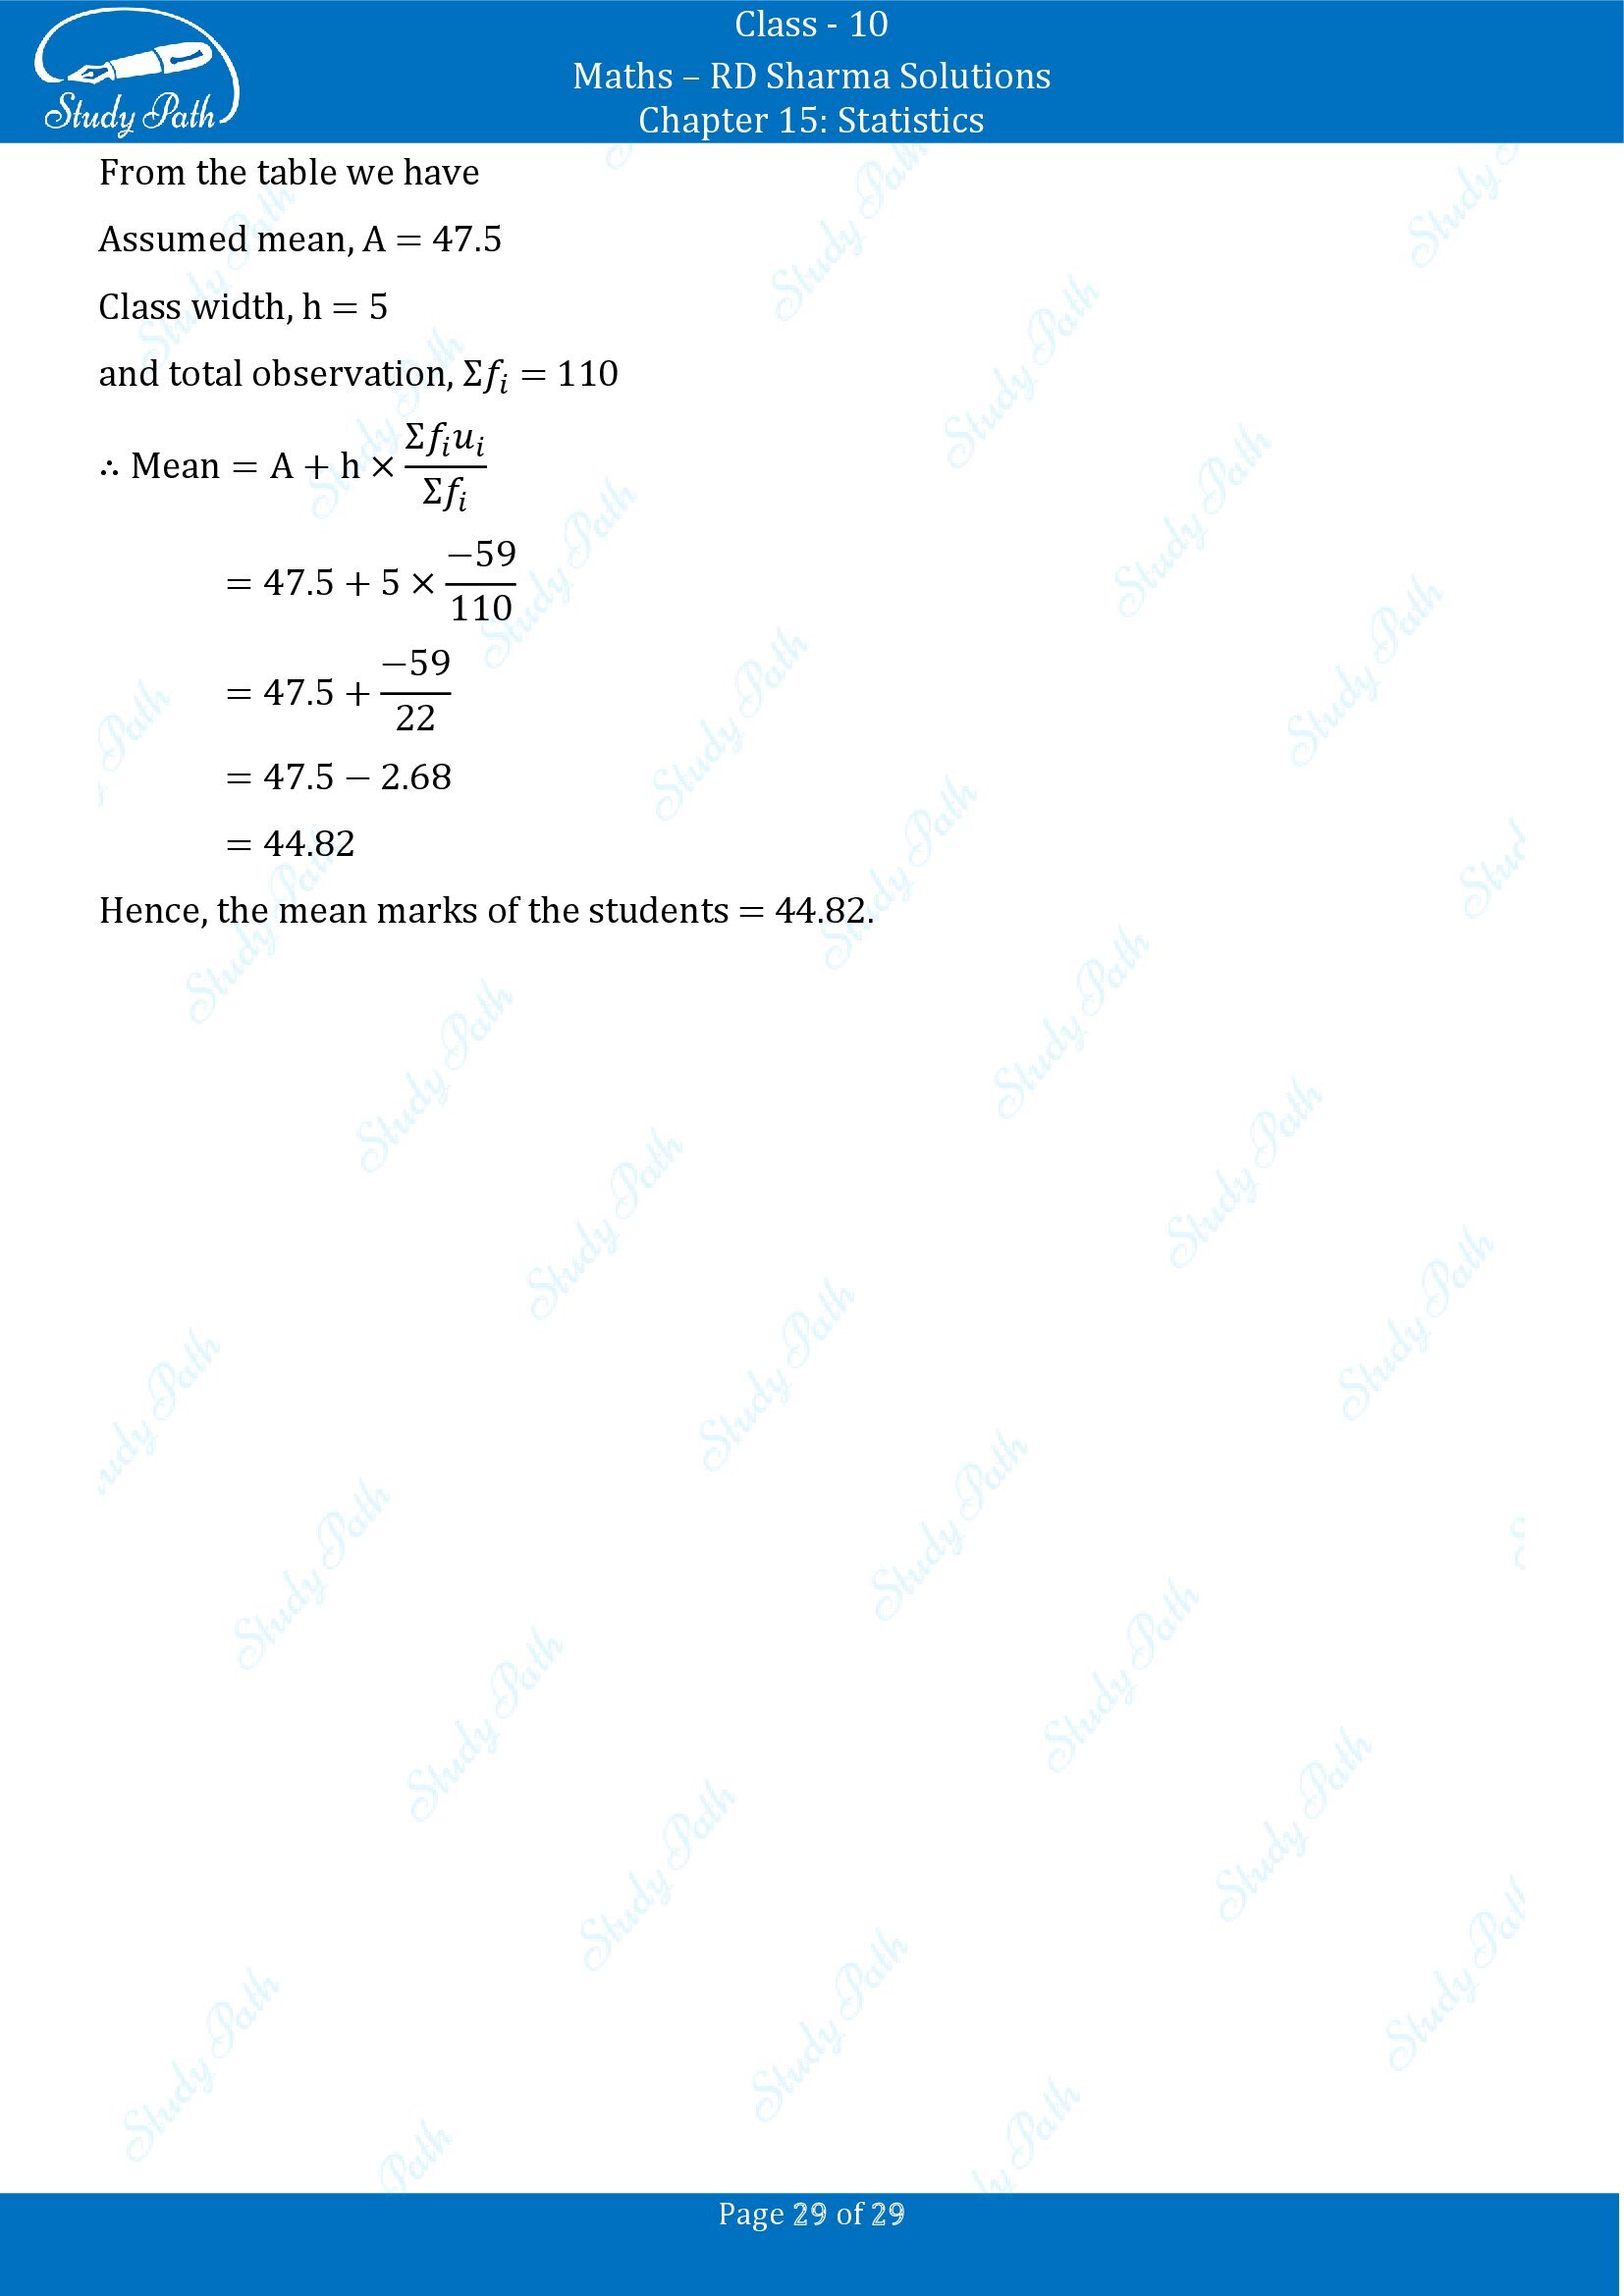 RD Sharma Solutions Class 10 Chapter 15 Statistics Exercise 15.3 0029